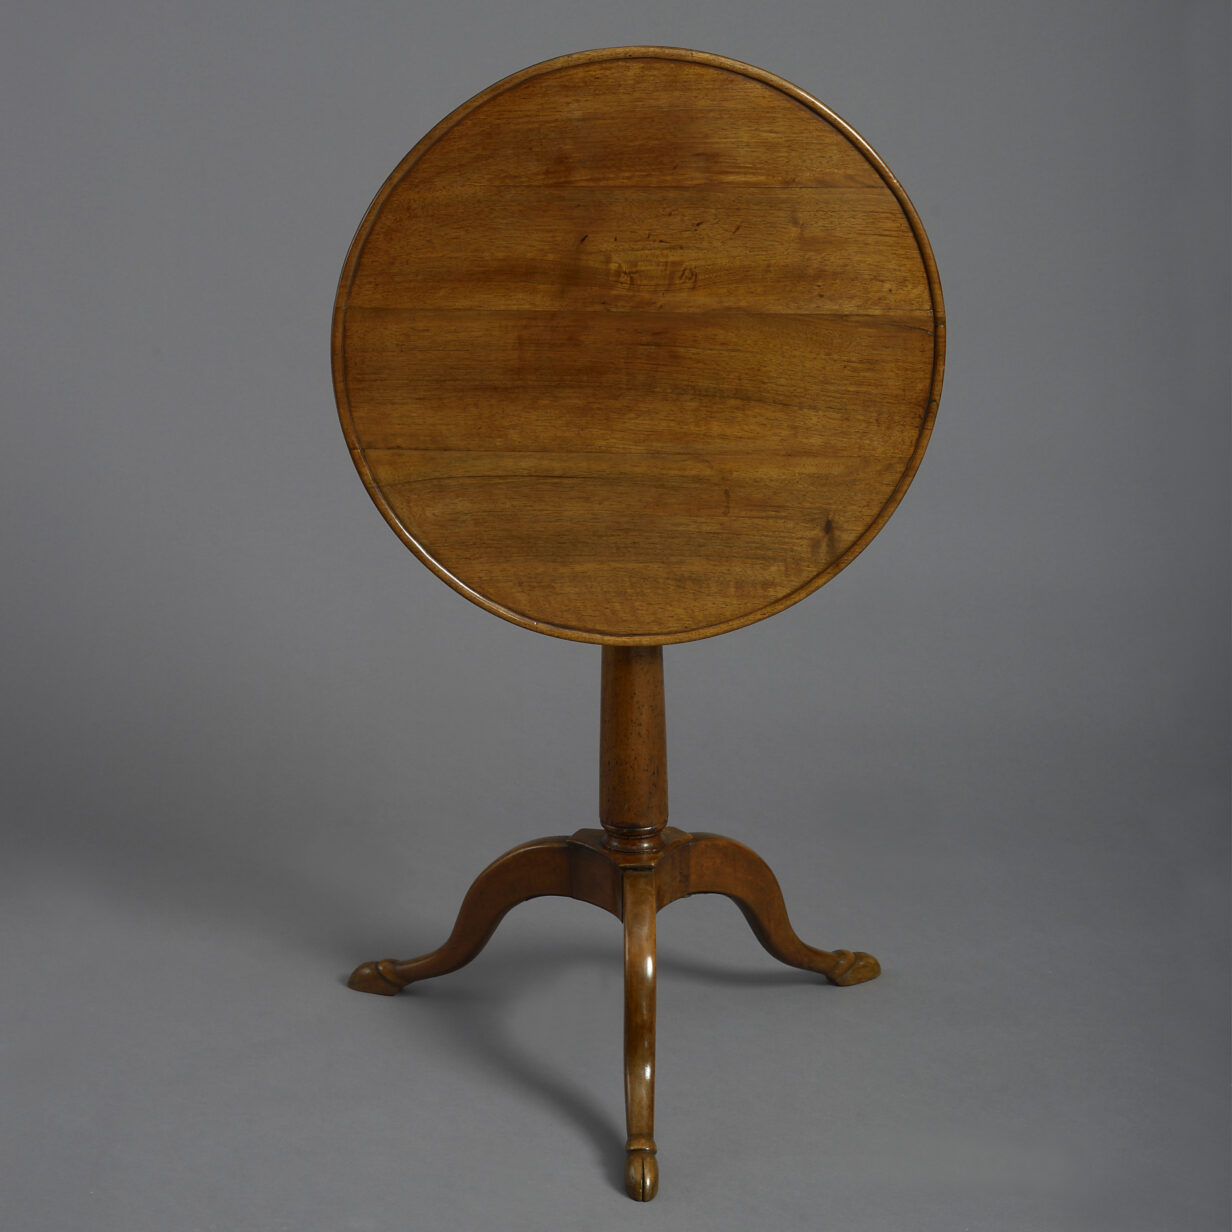 Late 18th century walnut occasional table